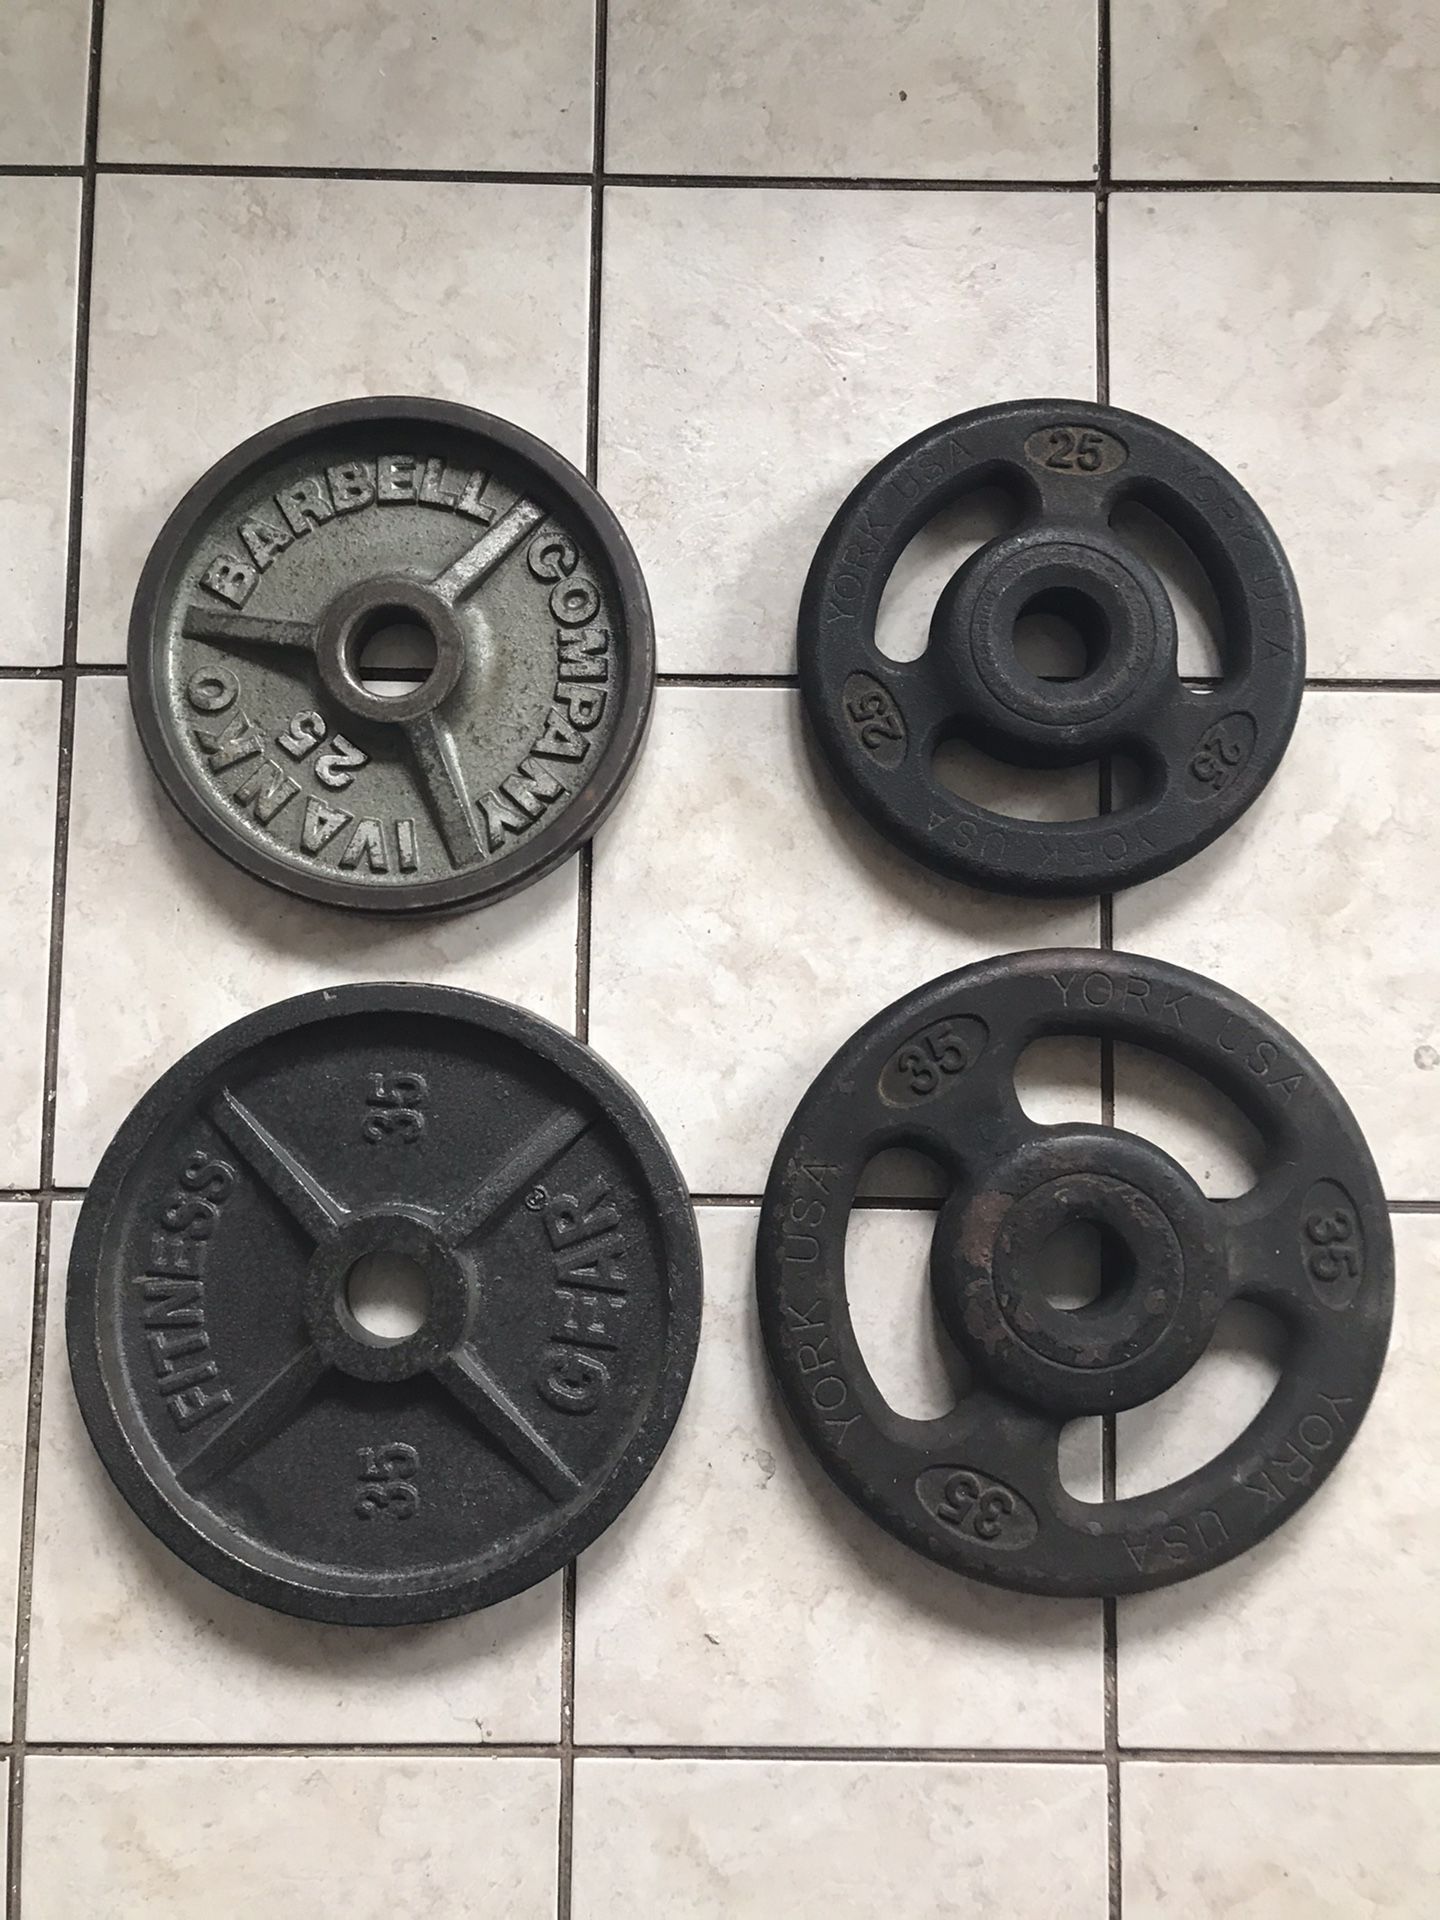 2 x 25 and 2 X 35 lb. Olympic Plates